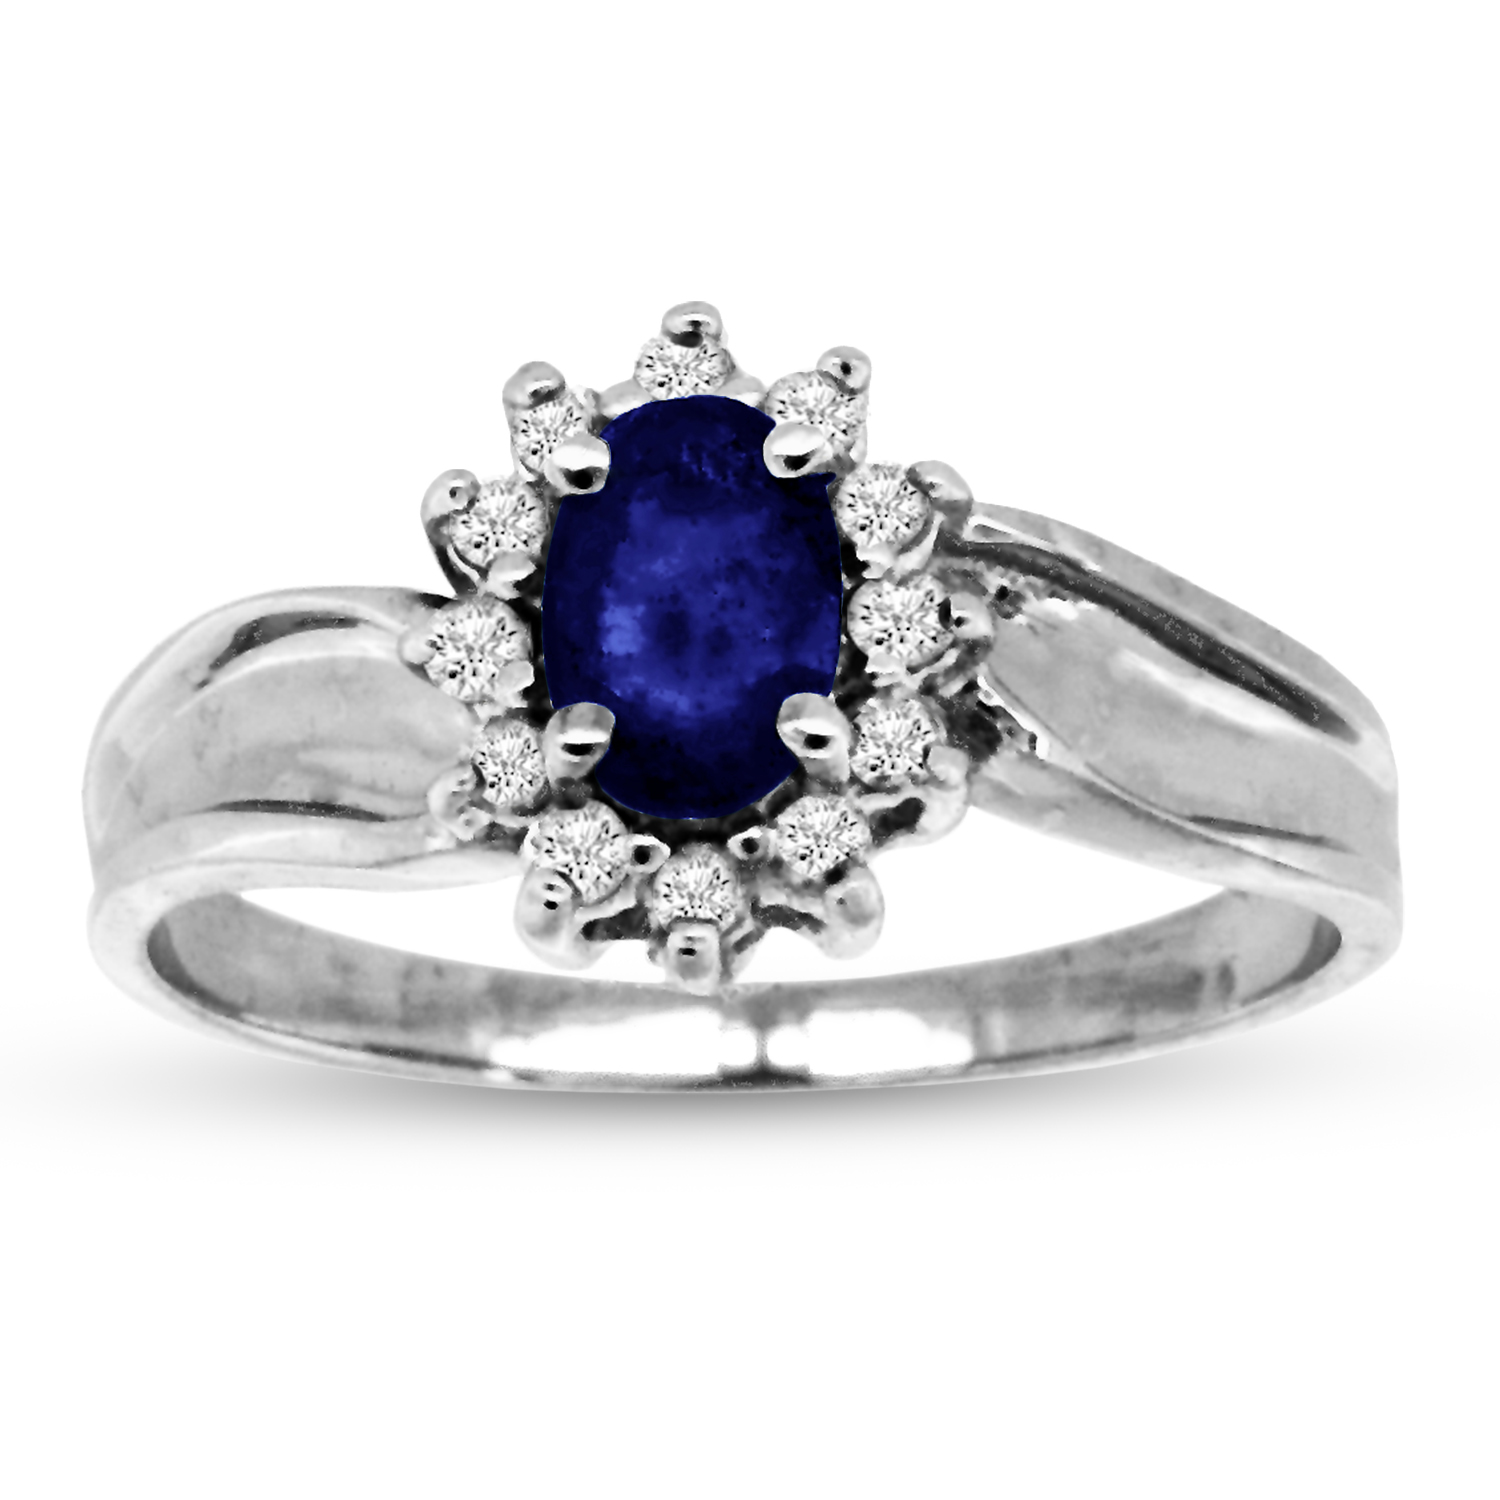 0.67cttw Sapphire and Diamond Fashion Ring set in 14k Gold